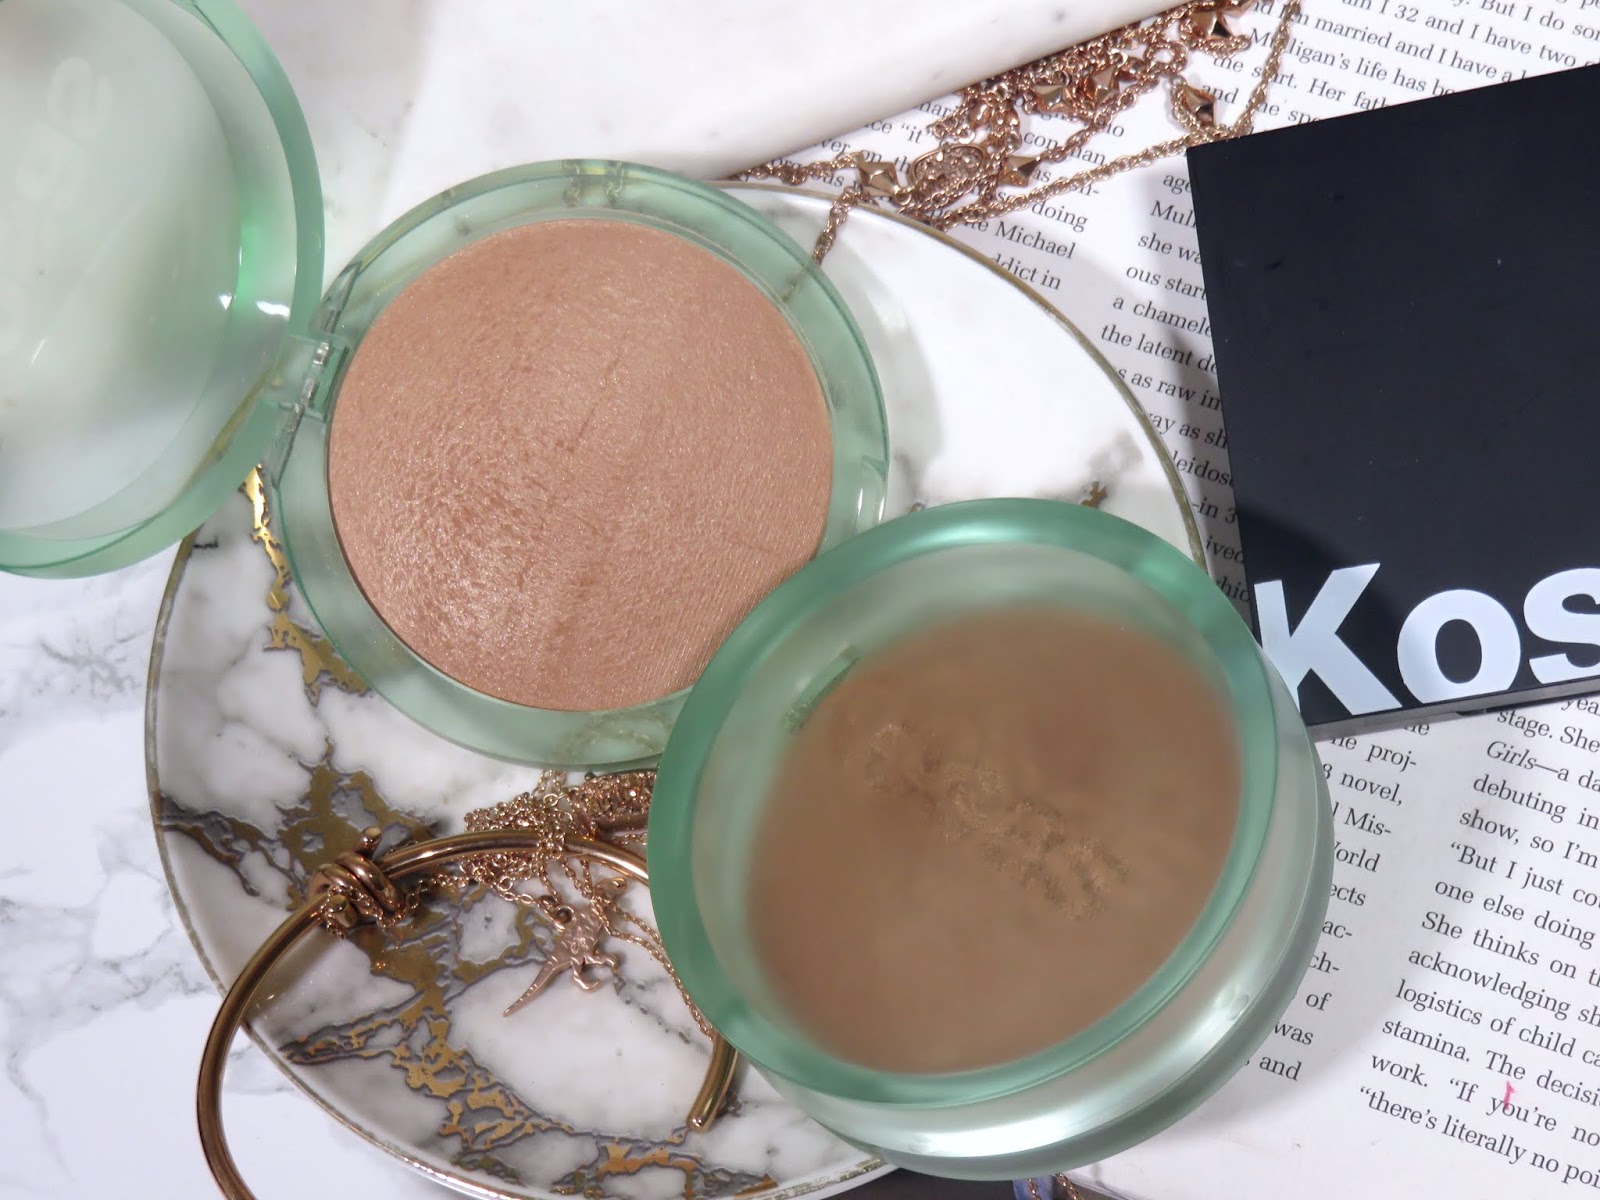 Kosas The Sun Show Moisturizing Baked Bronzer Review and Swatches